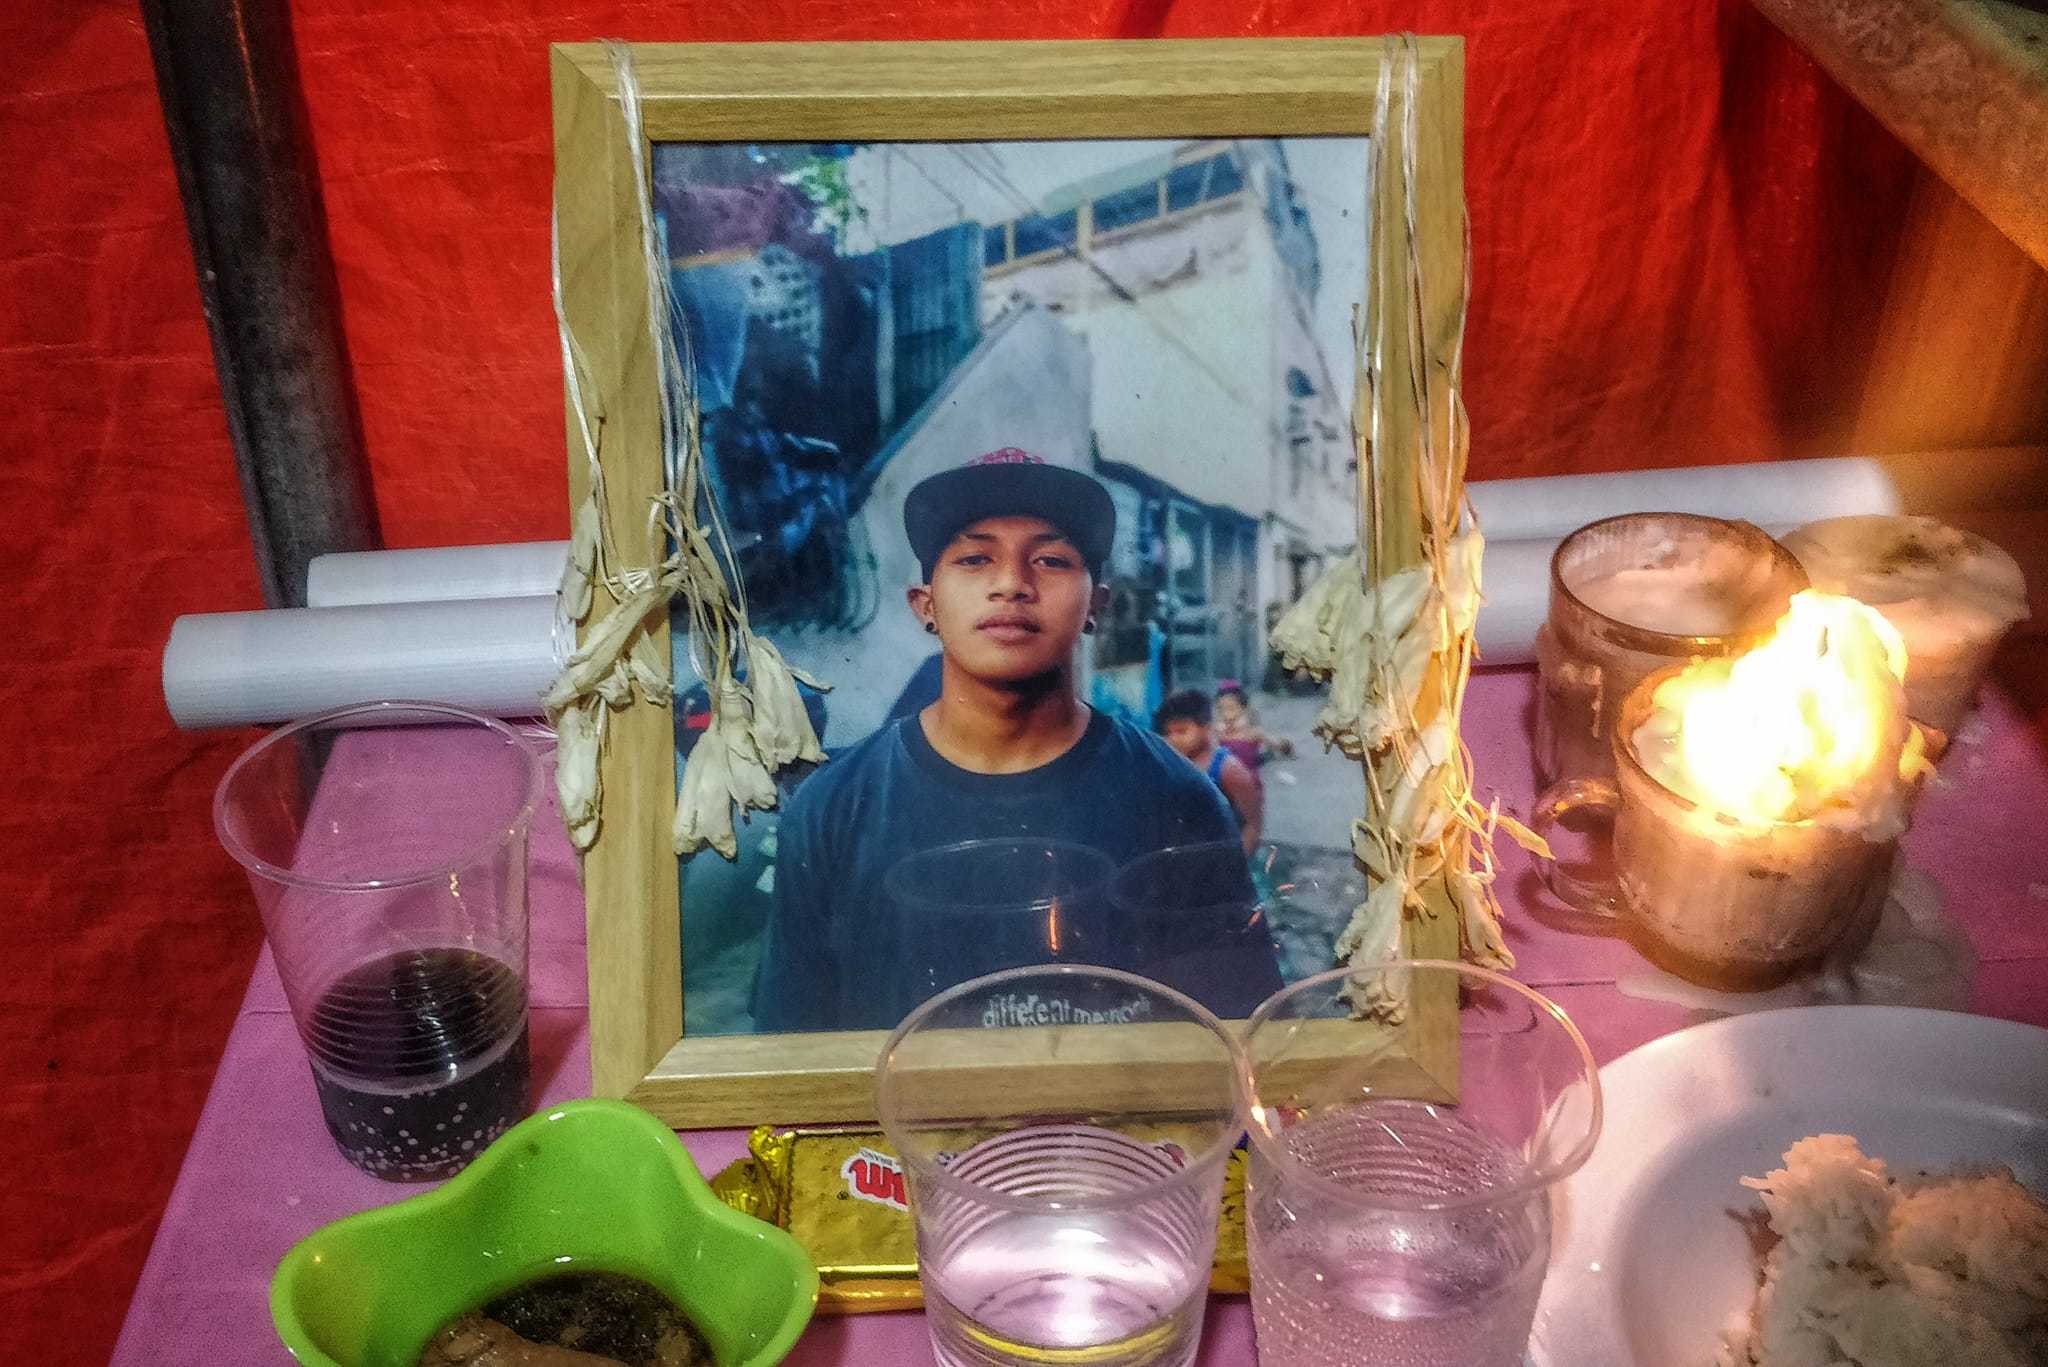 PNP assures no whitewashing on mistakenly shooting of male teenager in Navotas